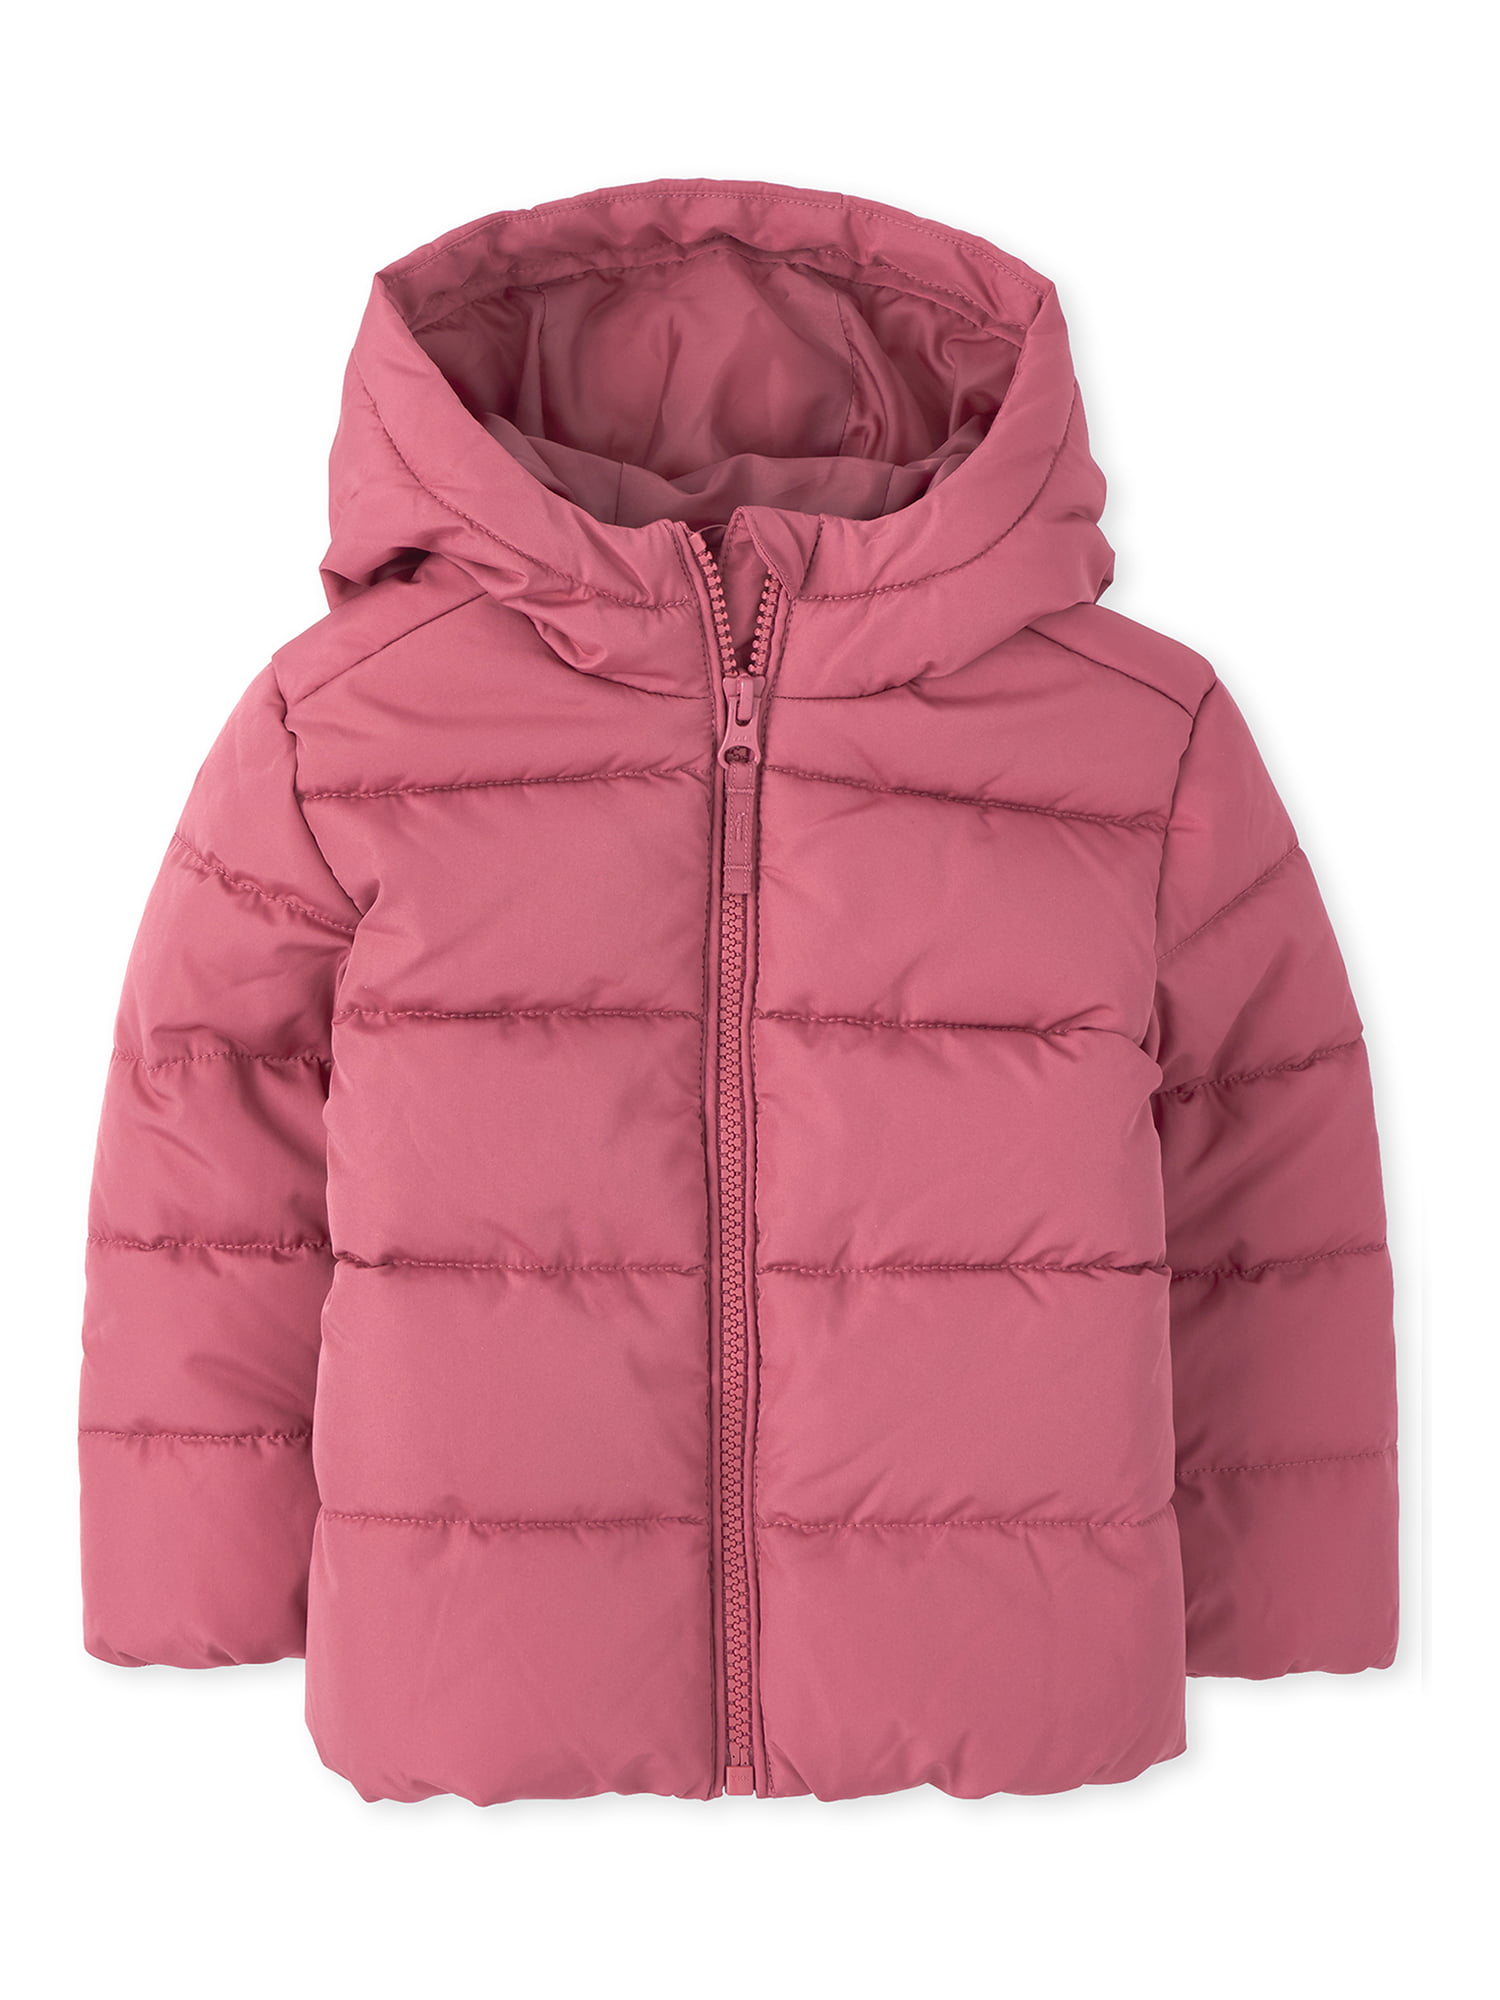 The Children's Place Baby Toddler Girl Puffer Winter Jacket Coat ...